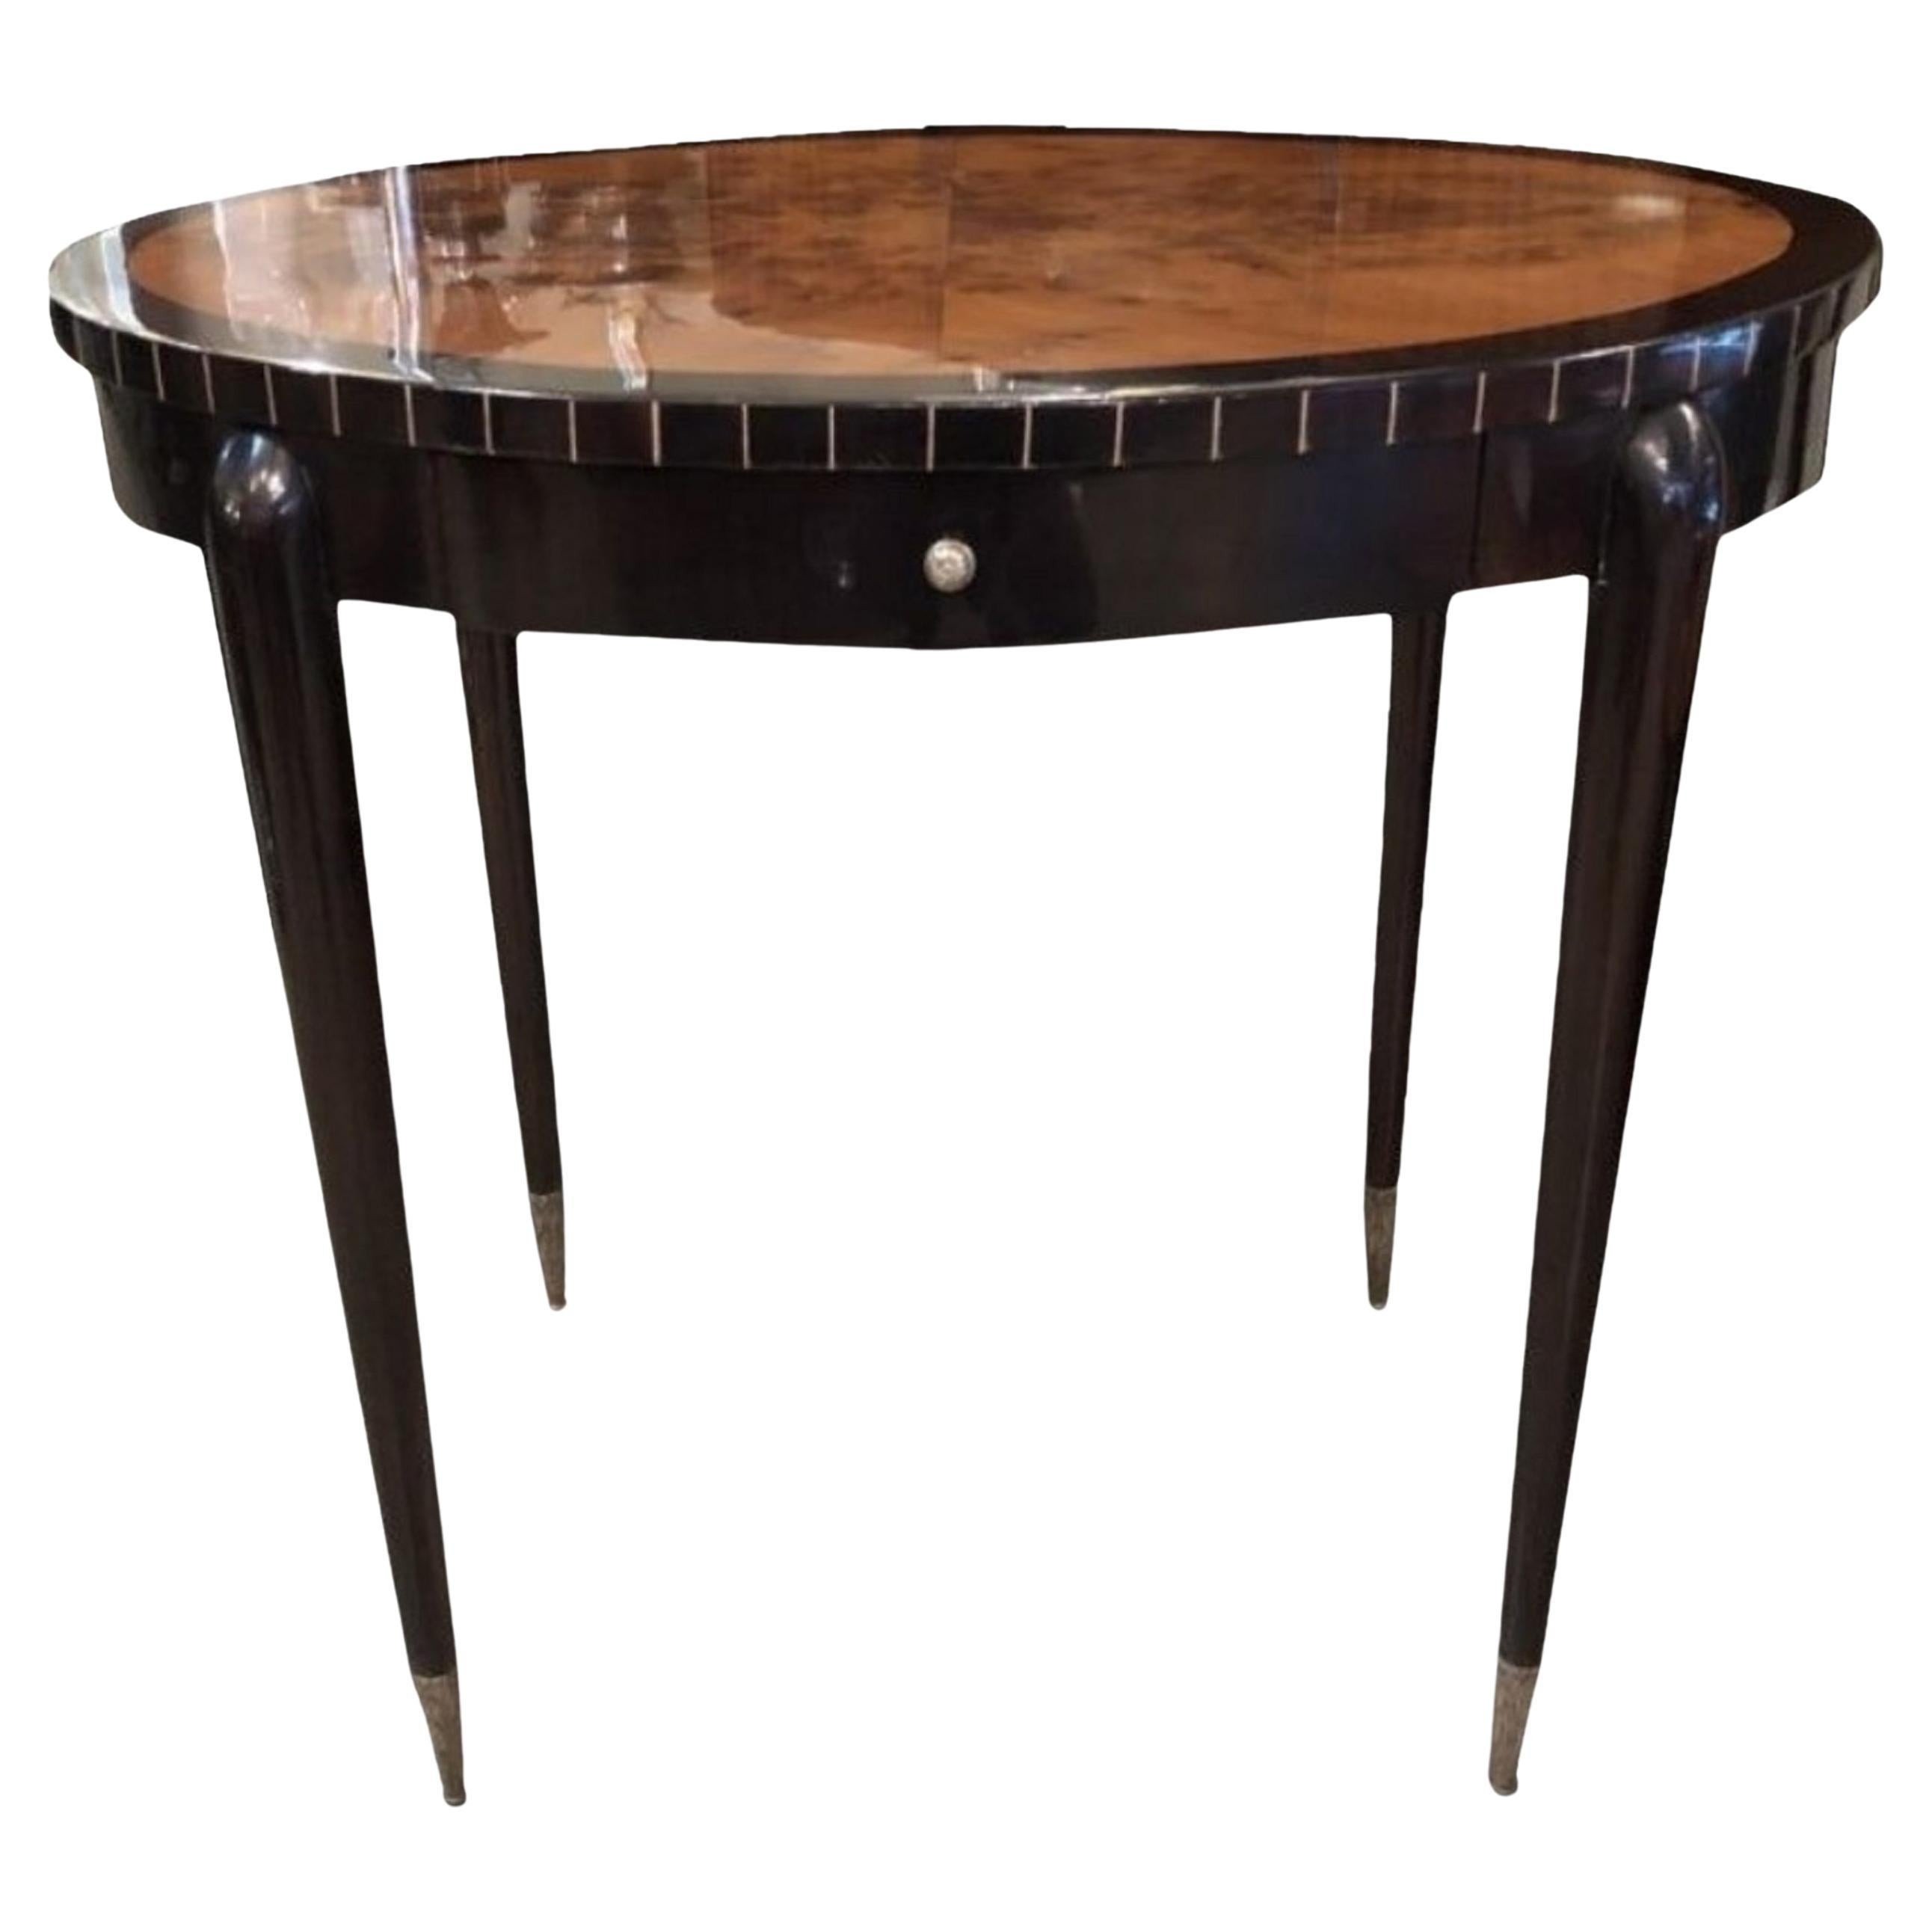 Table with Drawer in Wood and Silver Plated Bronze, 1920, France For Sale